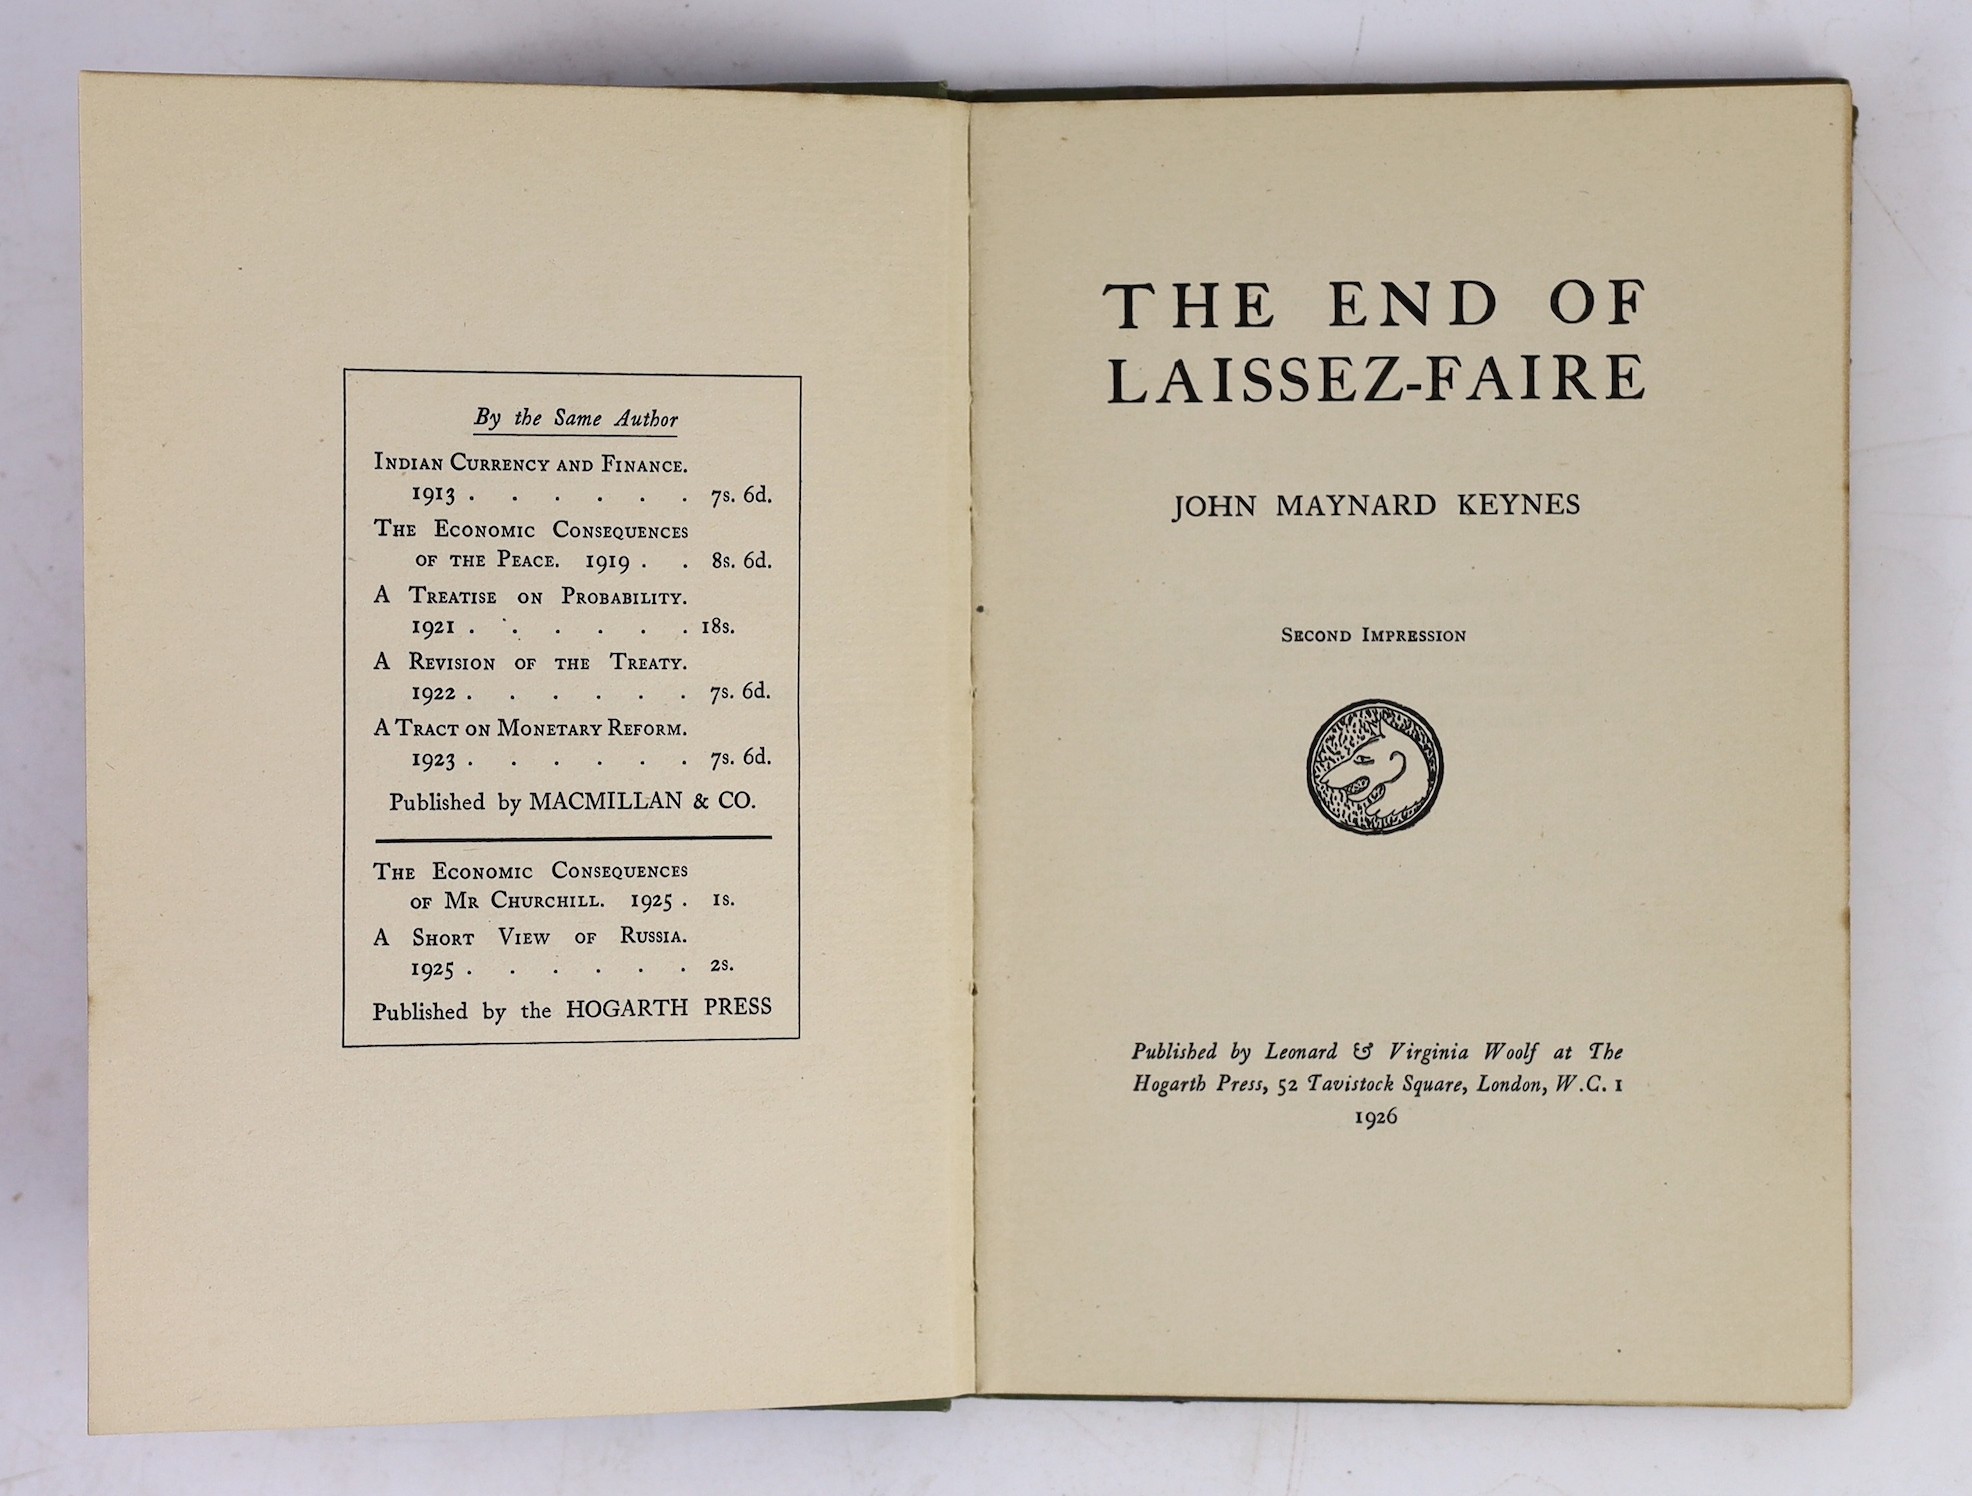 Keynes, John Maynard - A Revision of the Treaty....1st edition. half title and 6pp. adverts.; publisher's gilt cloth. 1922; sold together with these by the same author: A Tract of Monetary Reform. publisher's cloth. repr